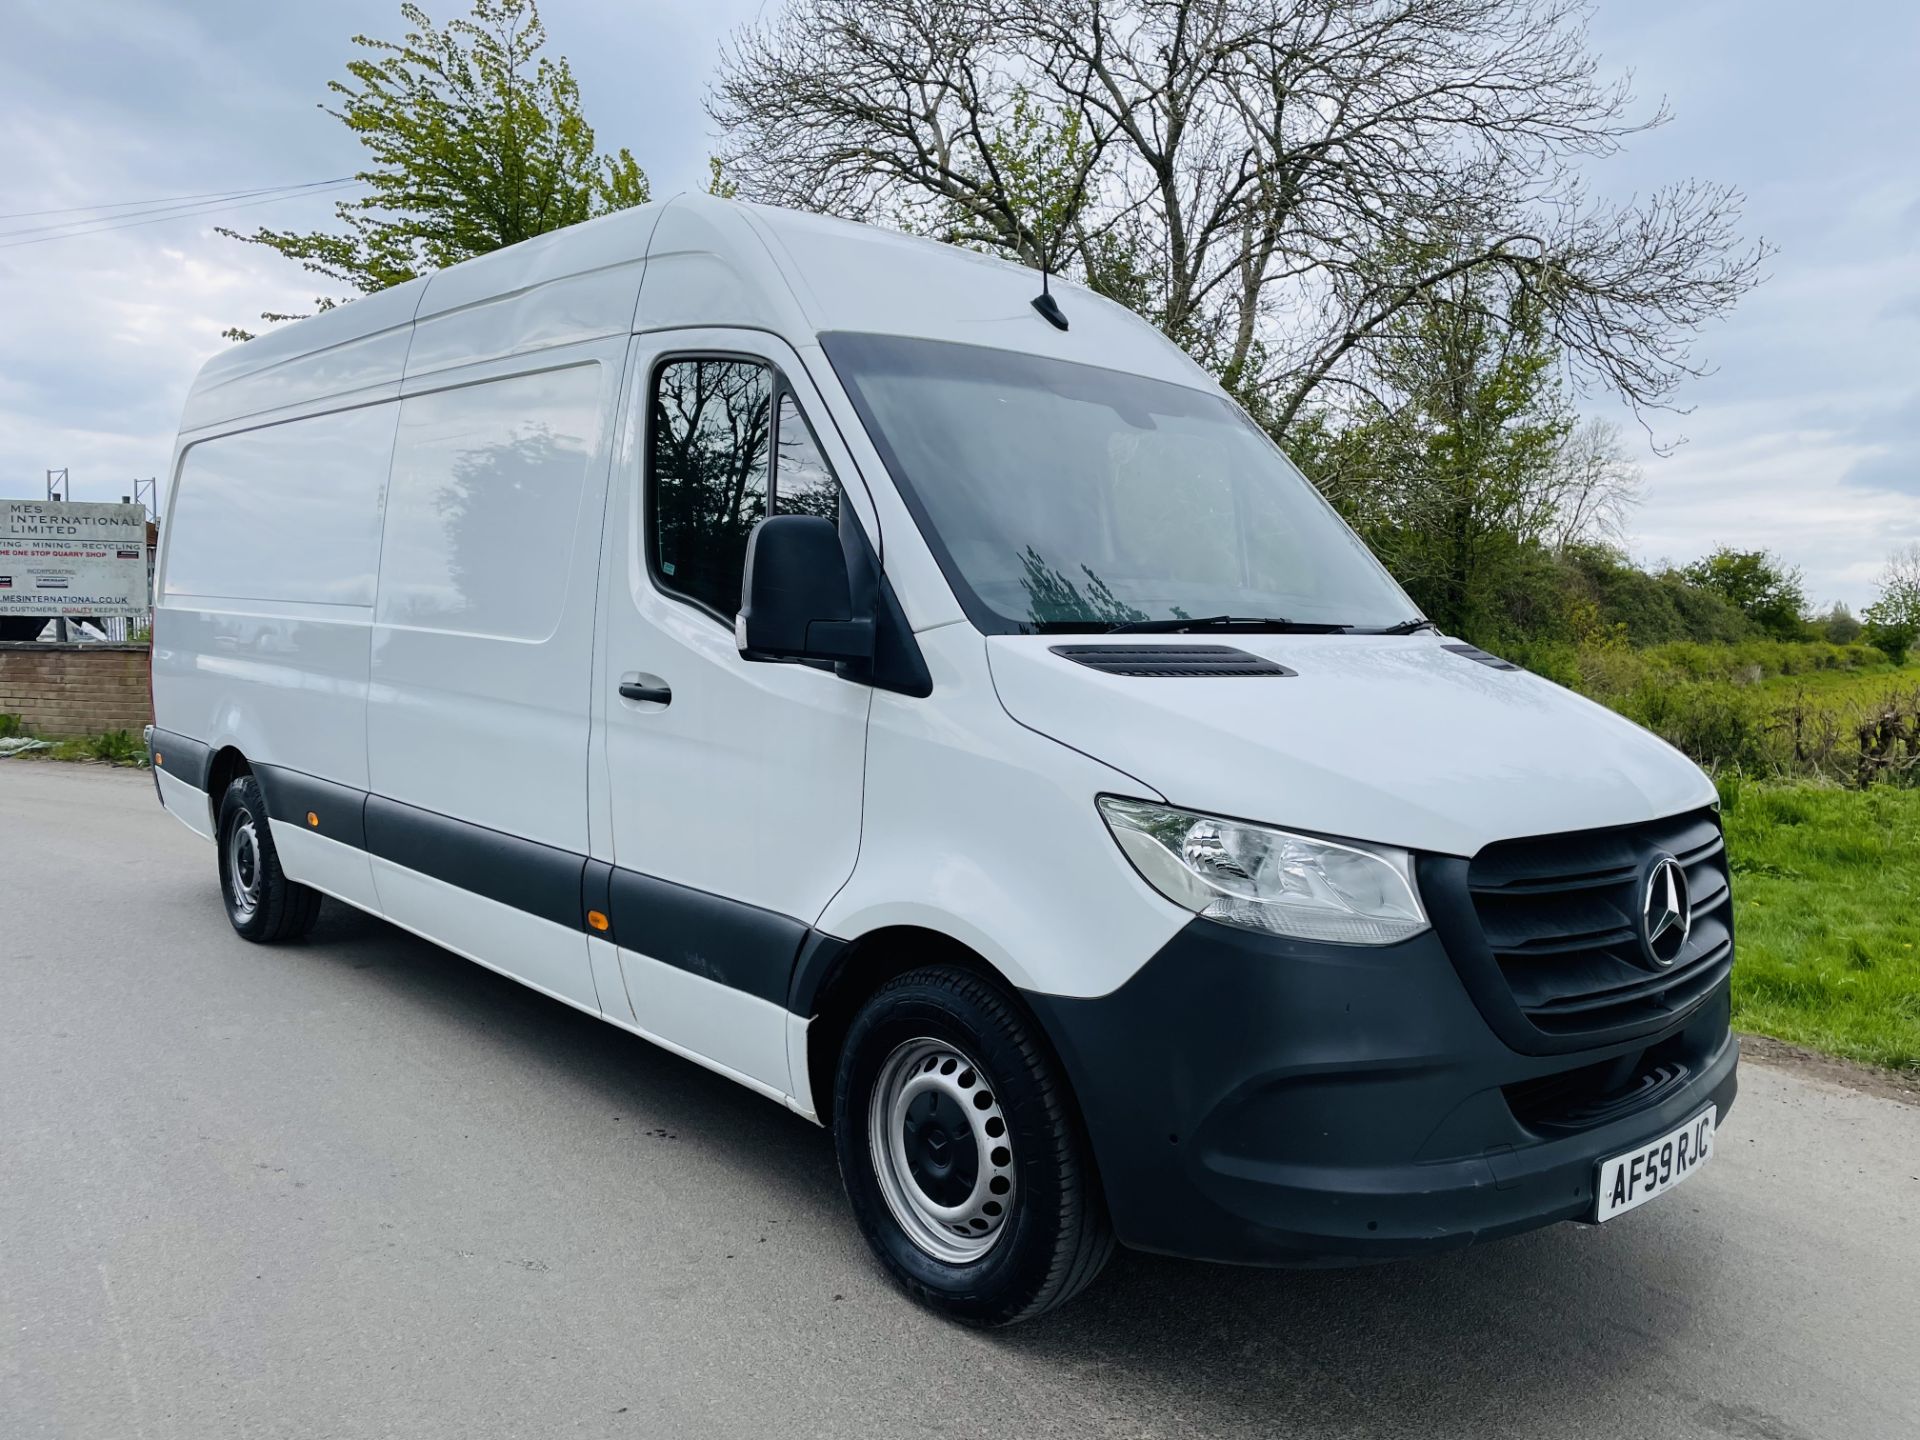 (ON SALE) MERCEDES SPRINTER 314CDI "LWB" HIGH ROOF (19 REG) EURO 6 - ONLY 83K MILES - CRUISE CONTROL